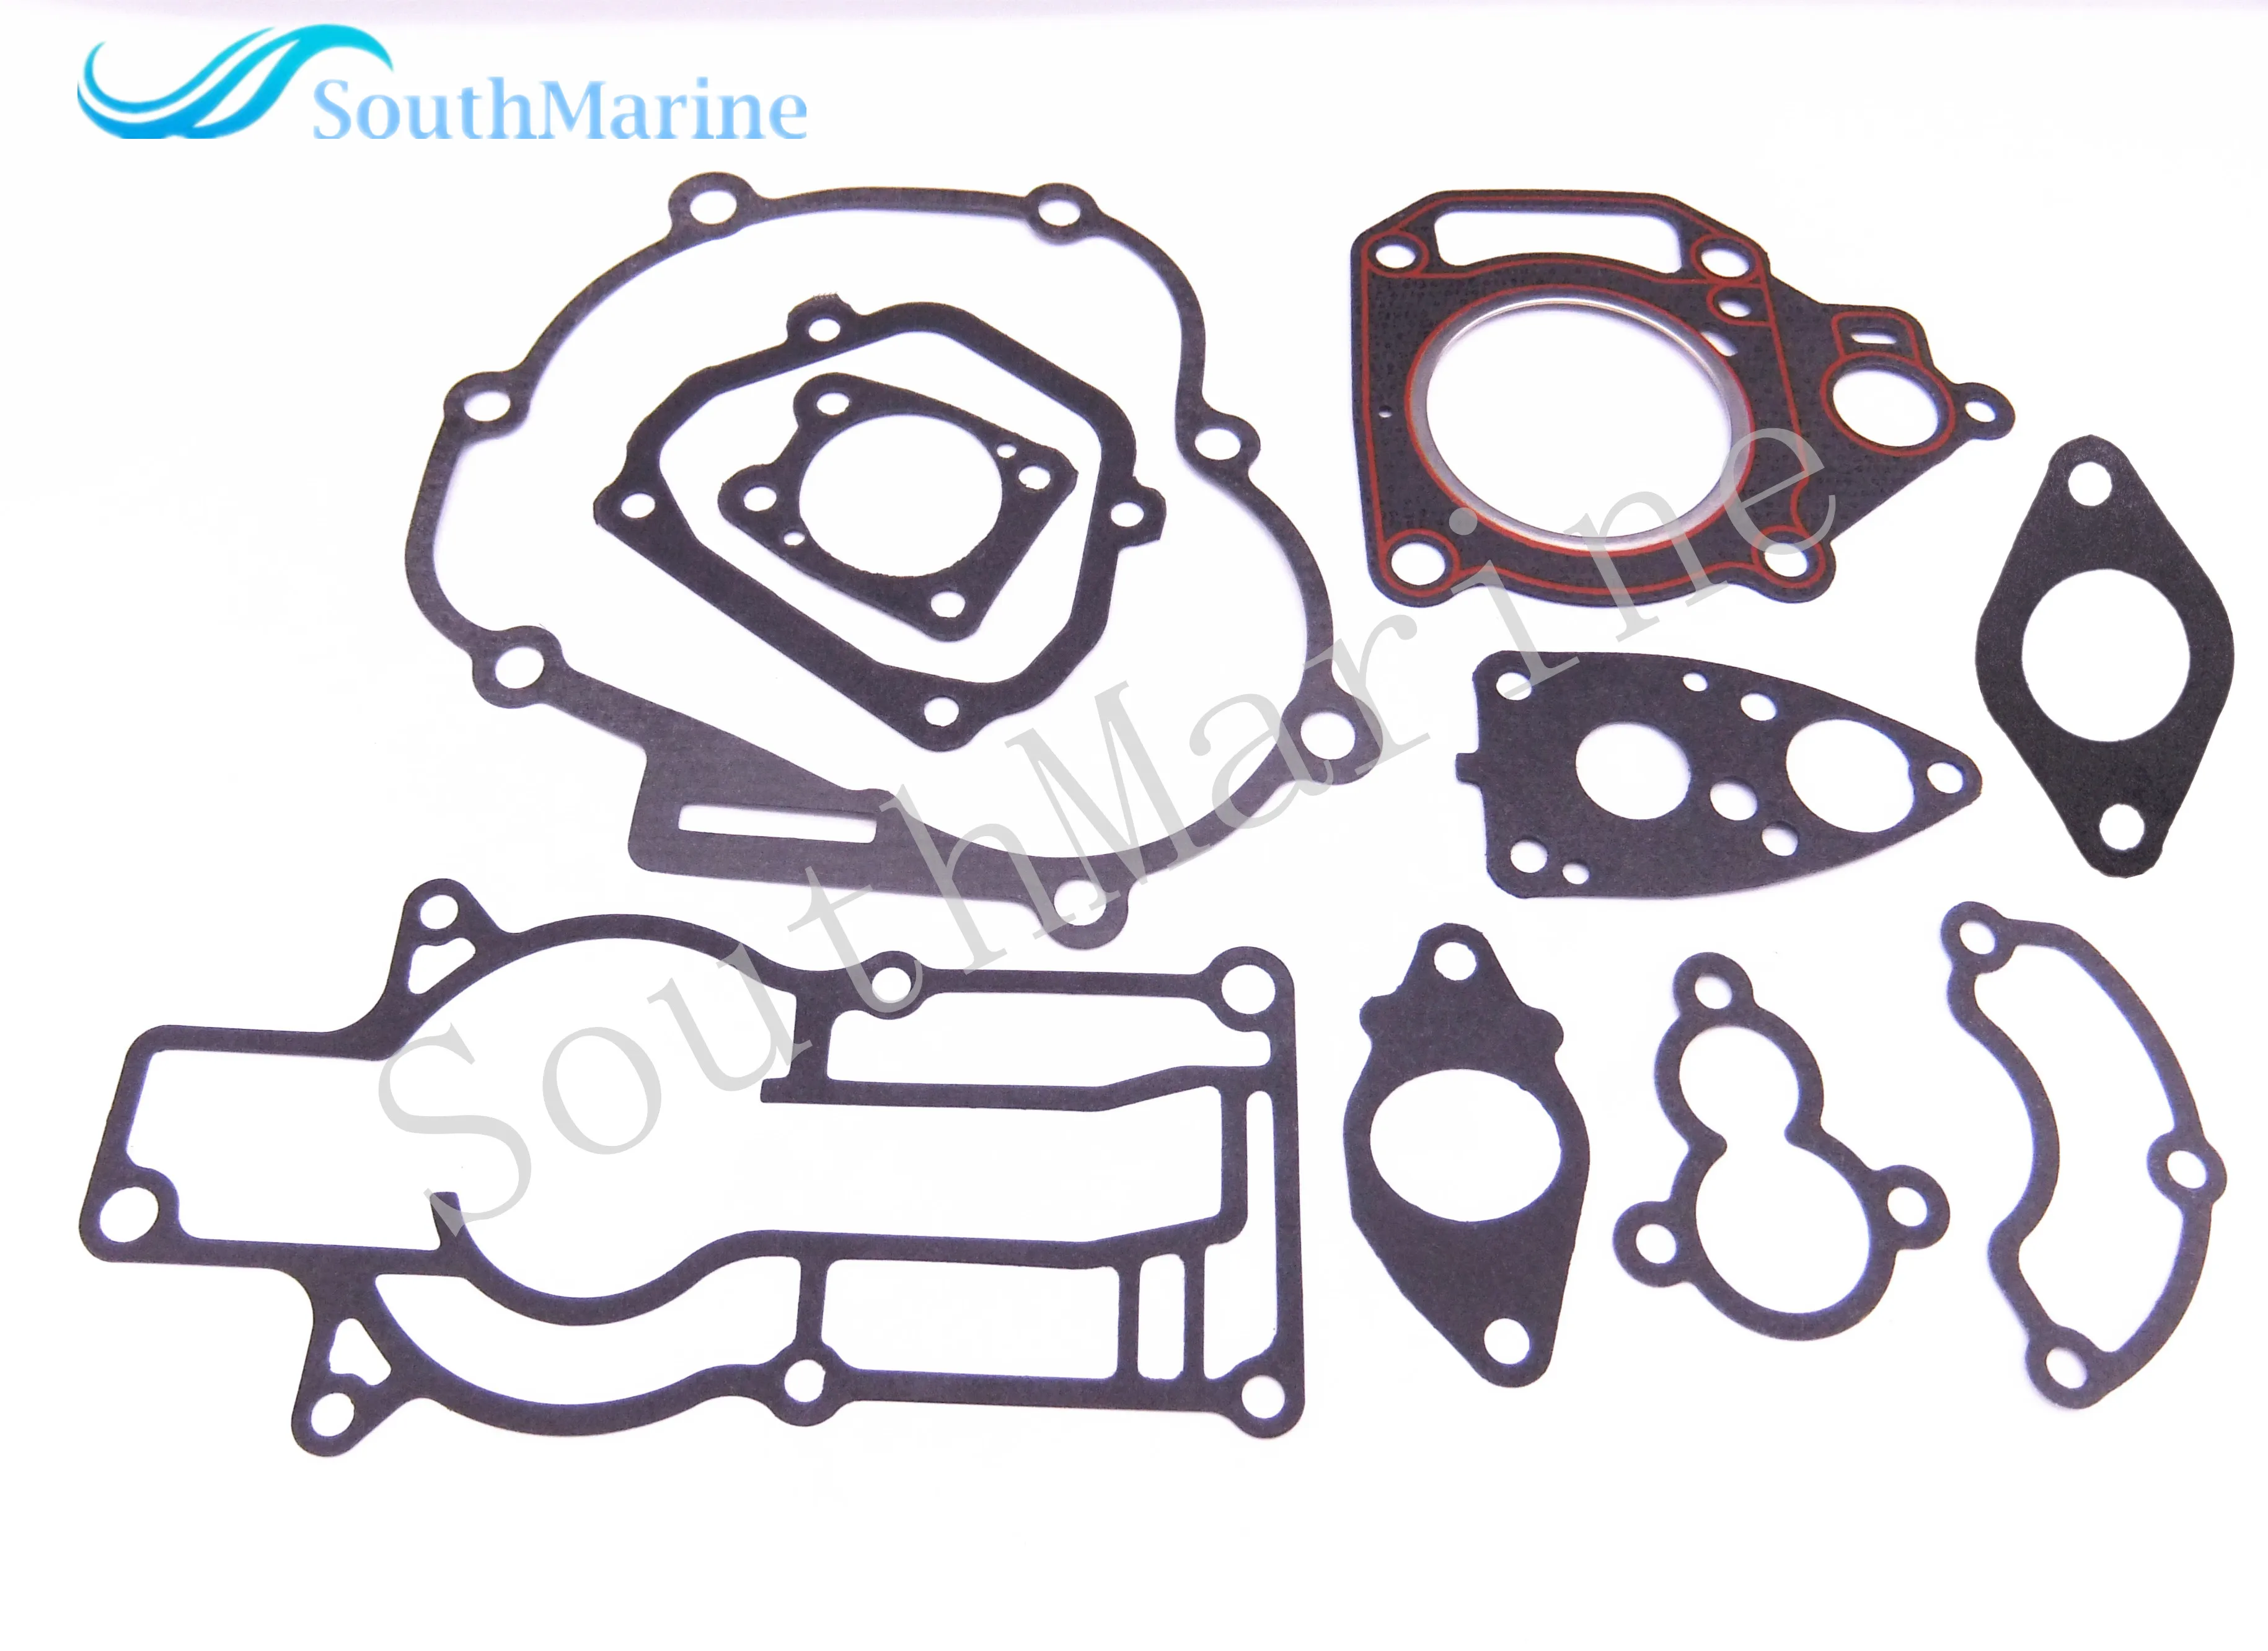 Outboard Engine Complete Power Head Seal Gasket Kit for Yamaha F4 Boat Motor